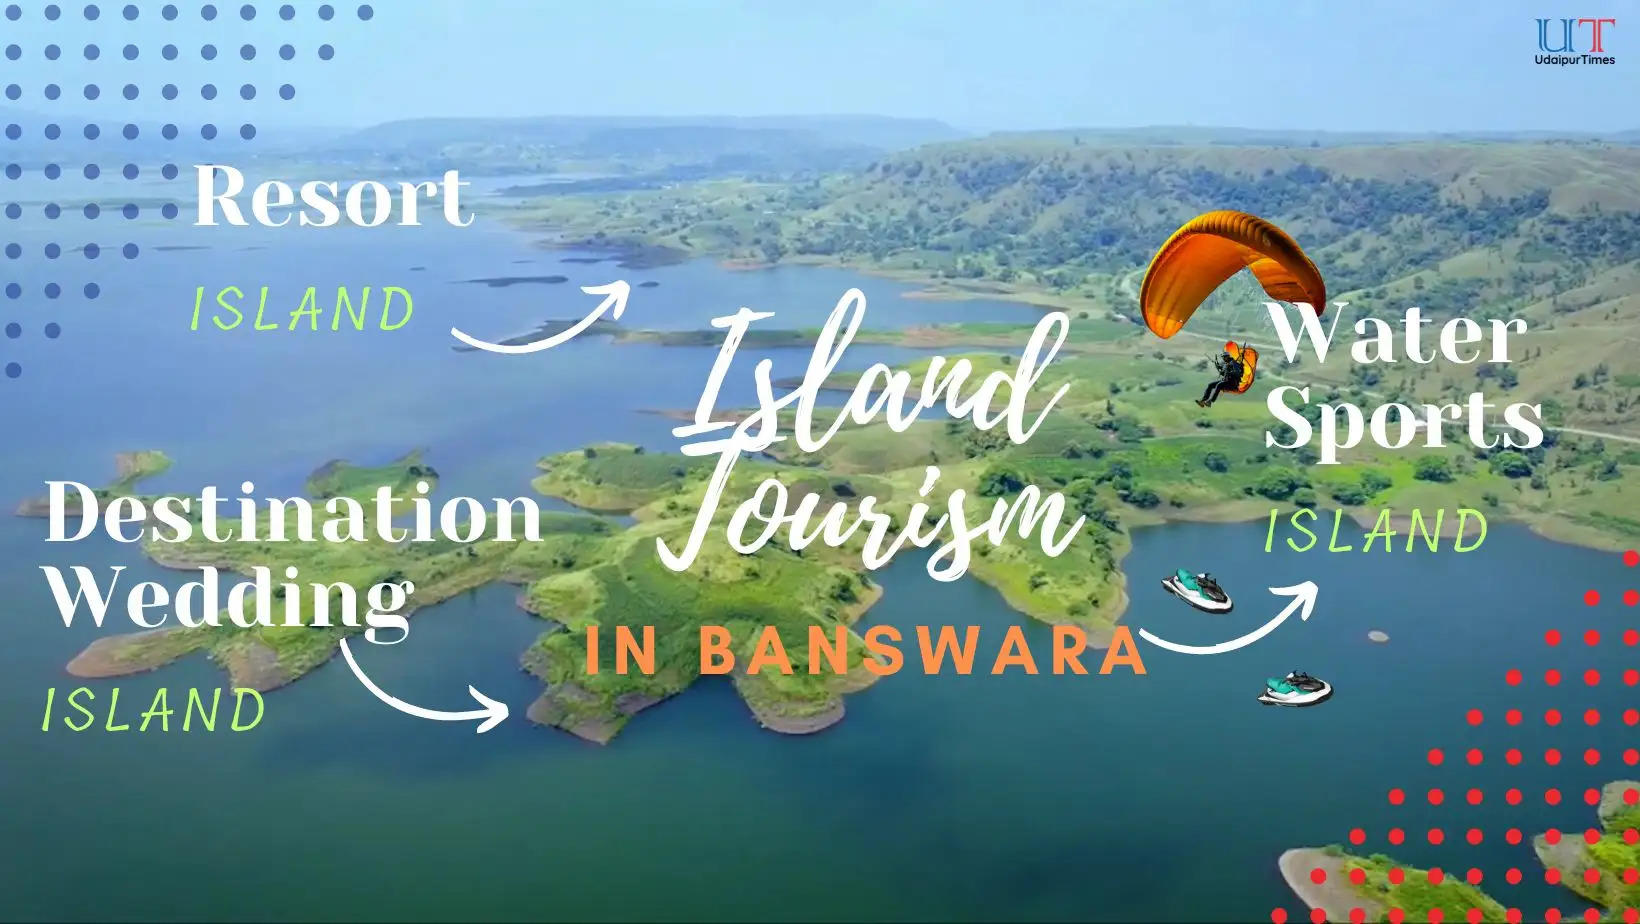 Island TOurism in Banswara will put this vagad city on the global tourism map